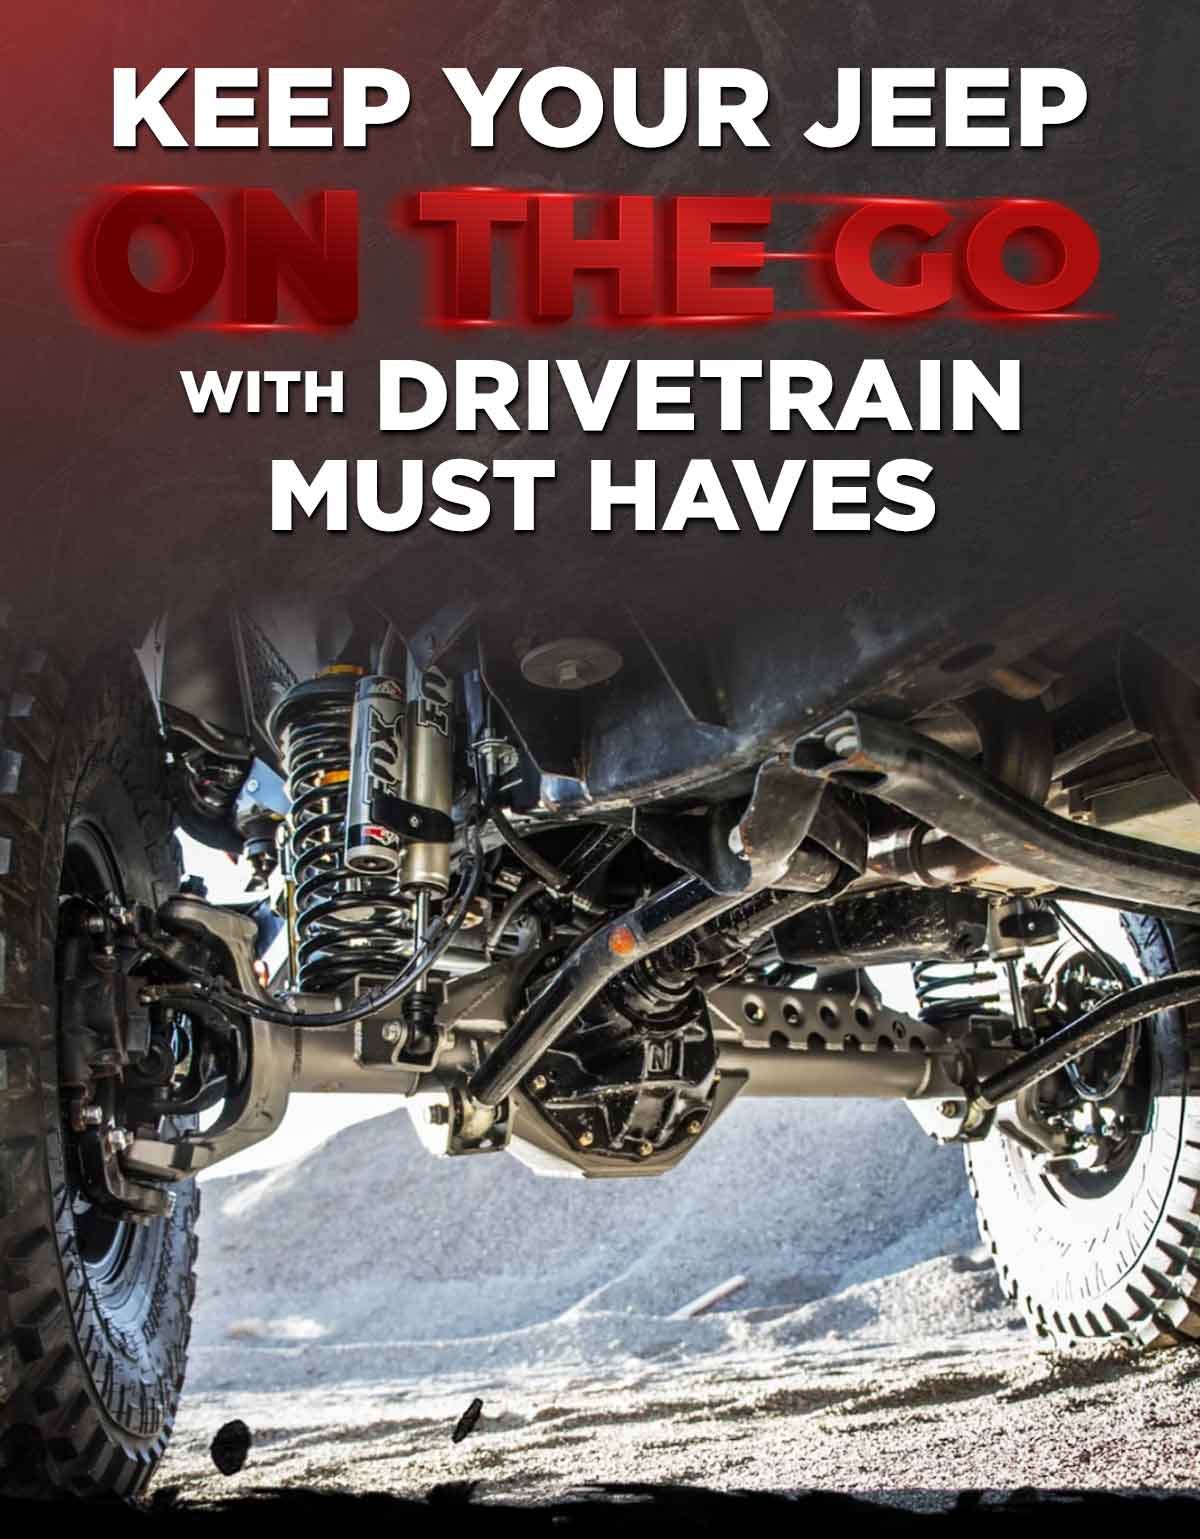 Keep Your Jeep On the Go With Drivetrain Must Haves